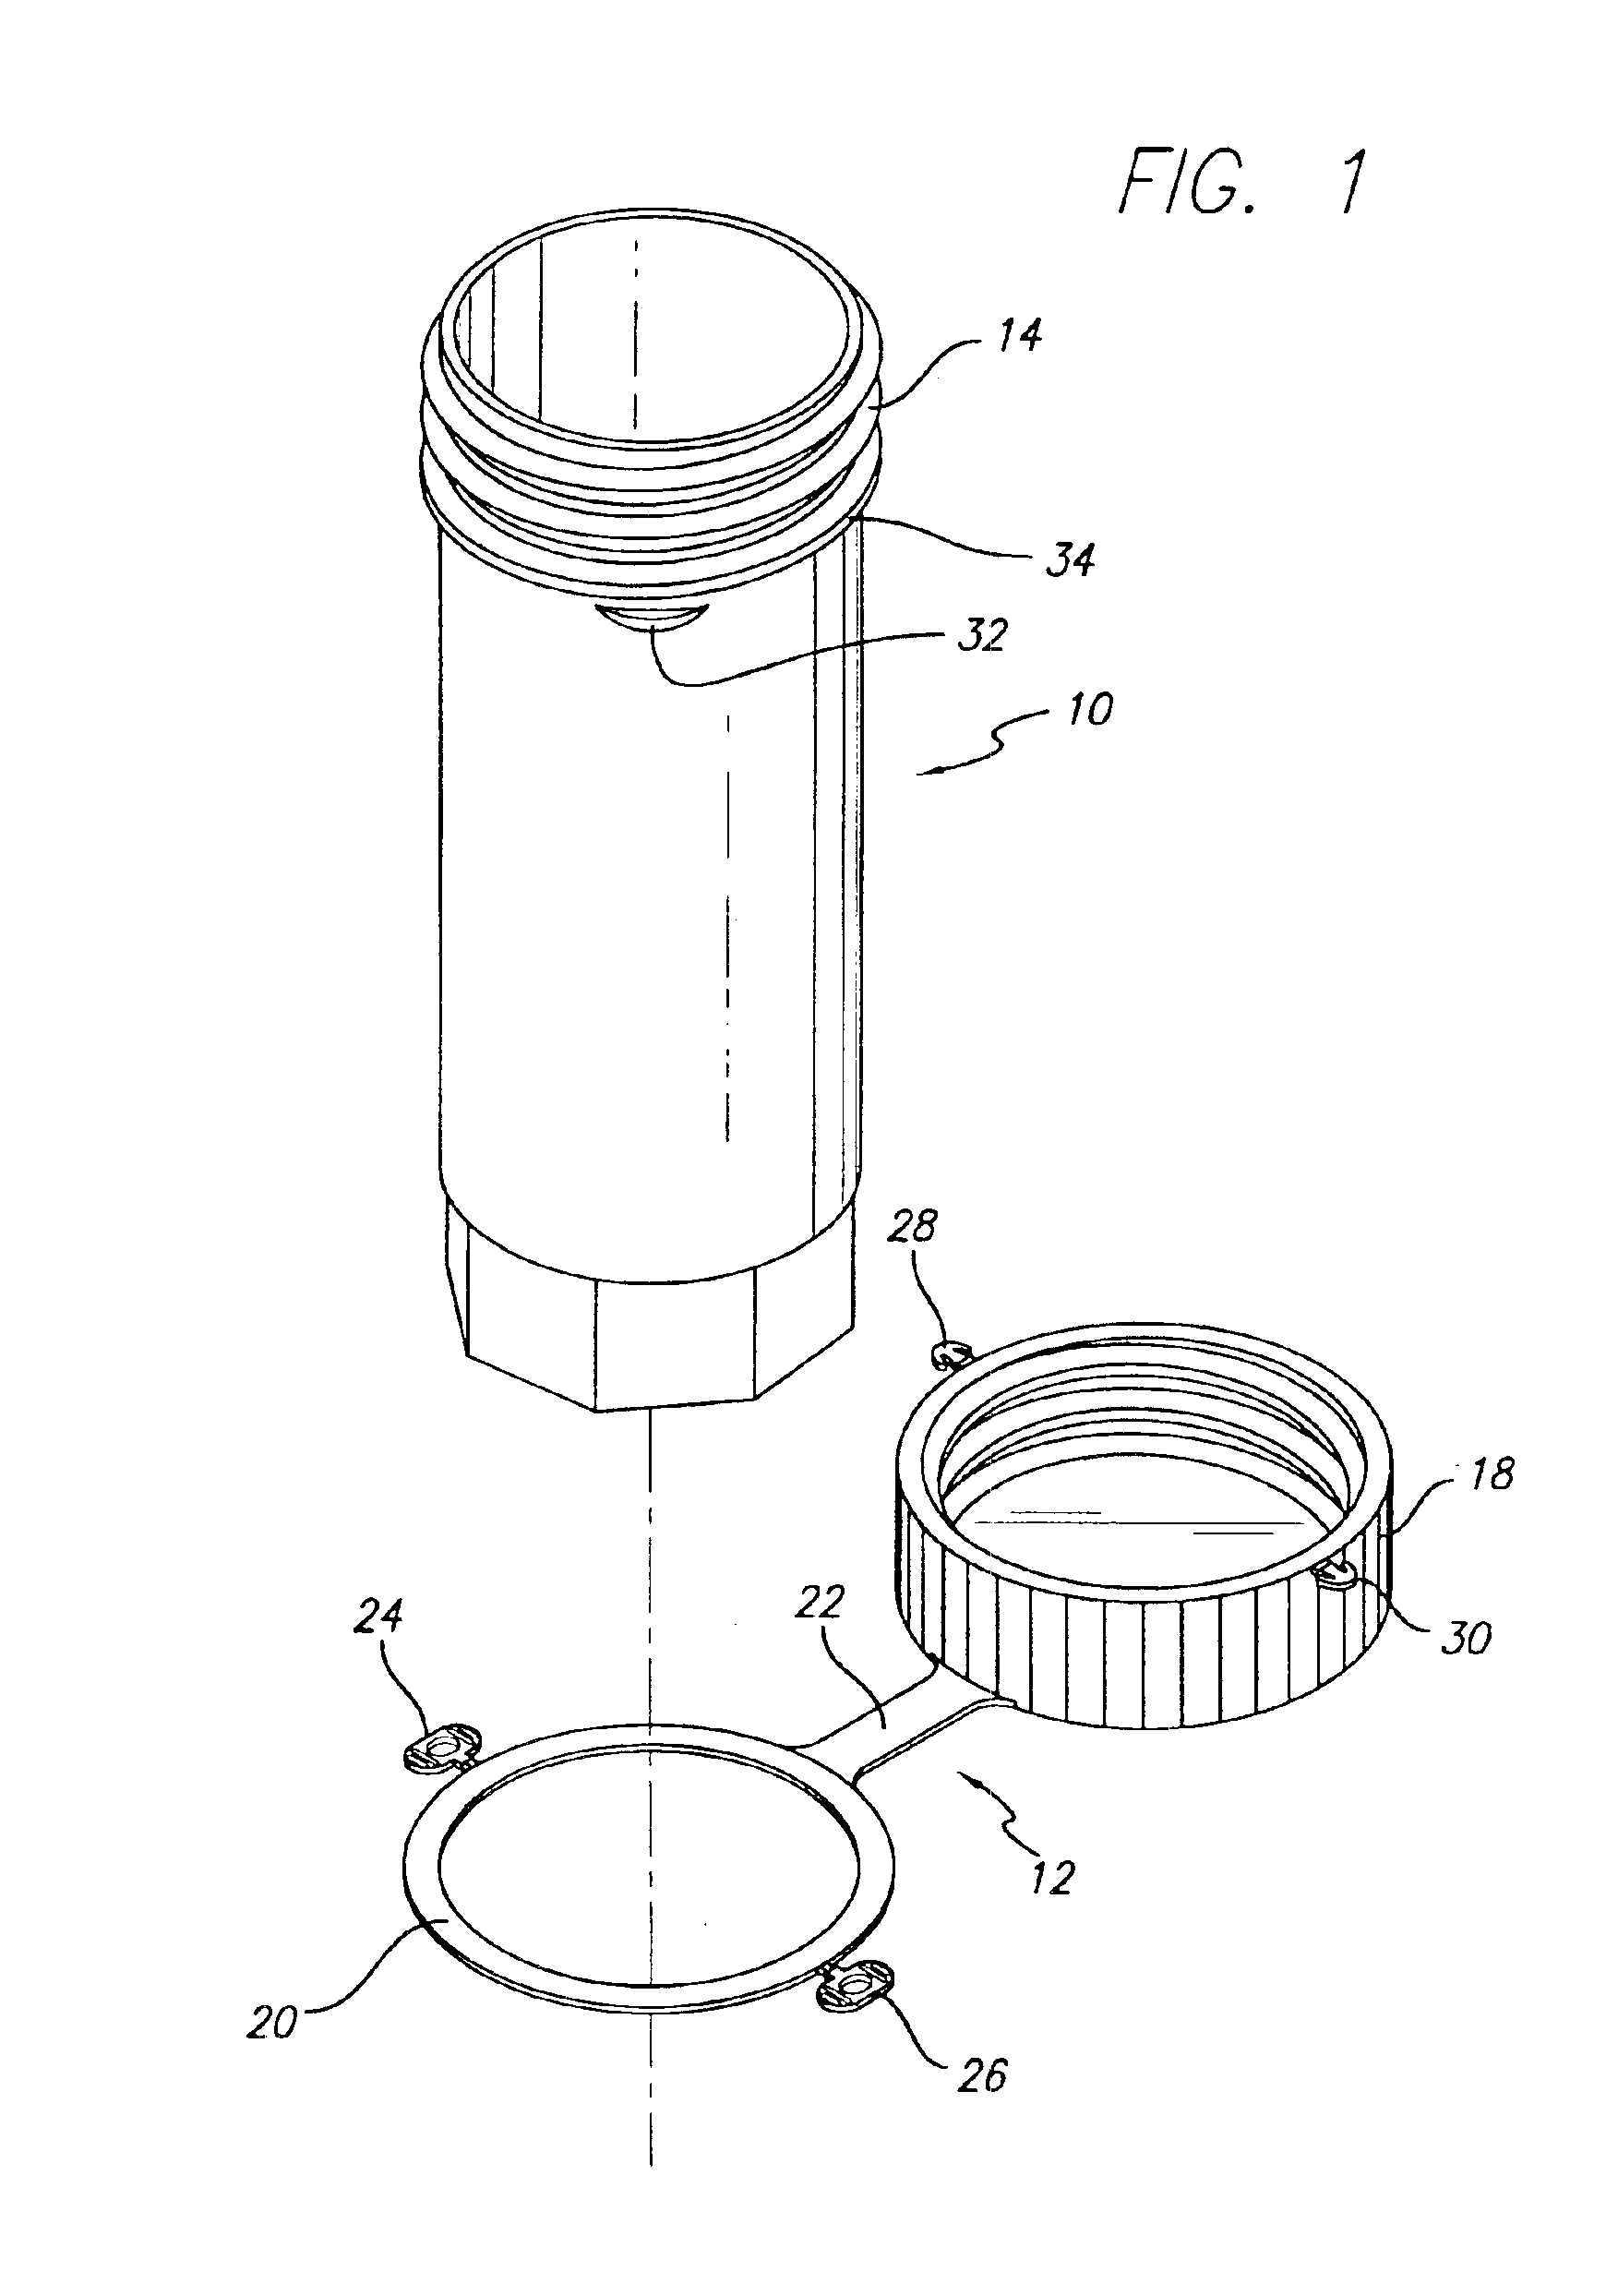 Tamper evident vial cap and integrity assurance method